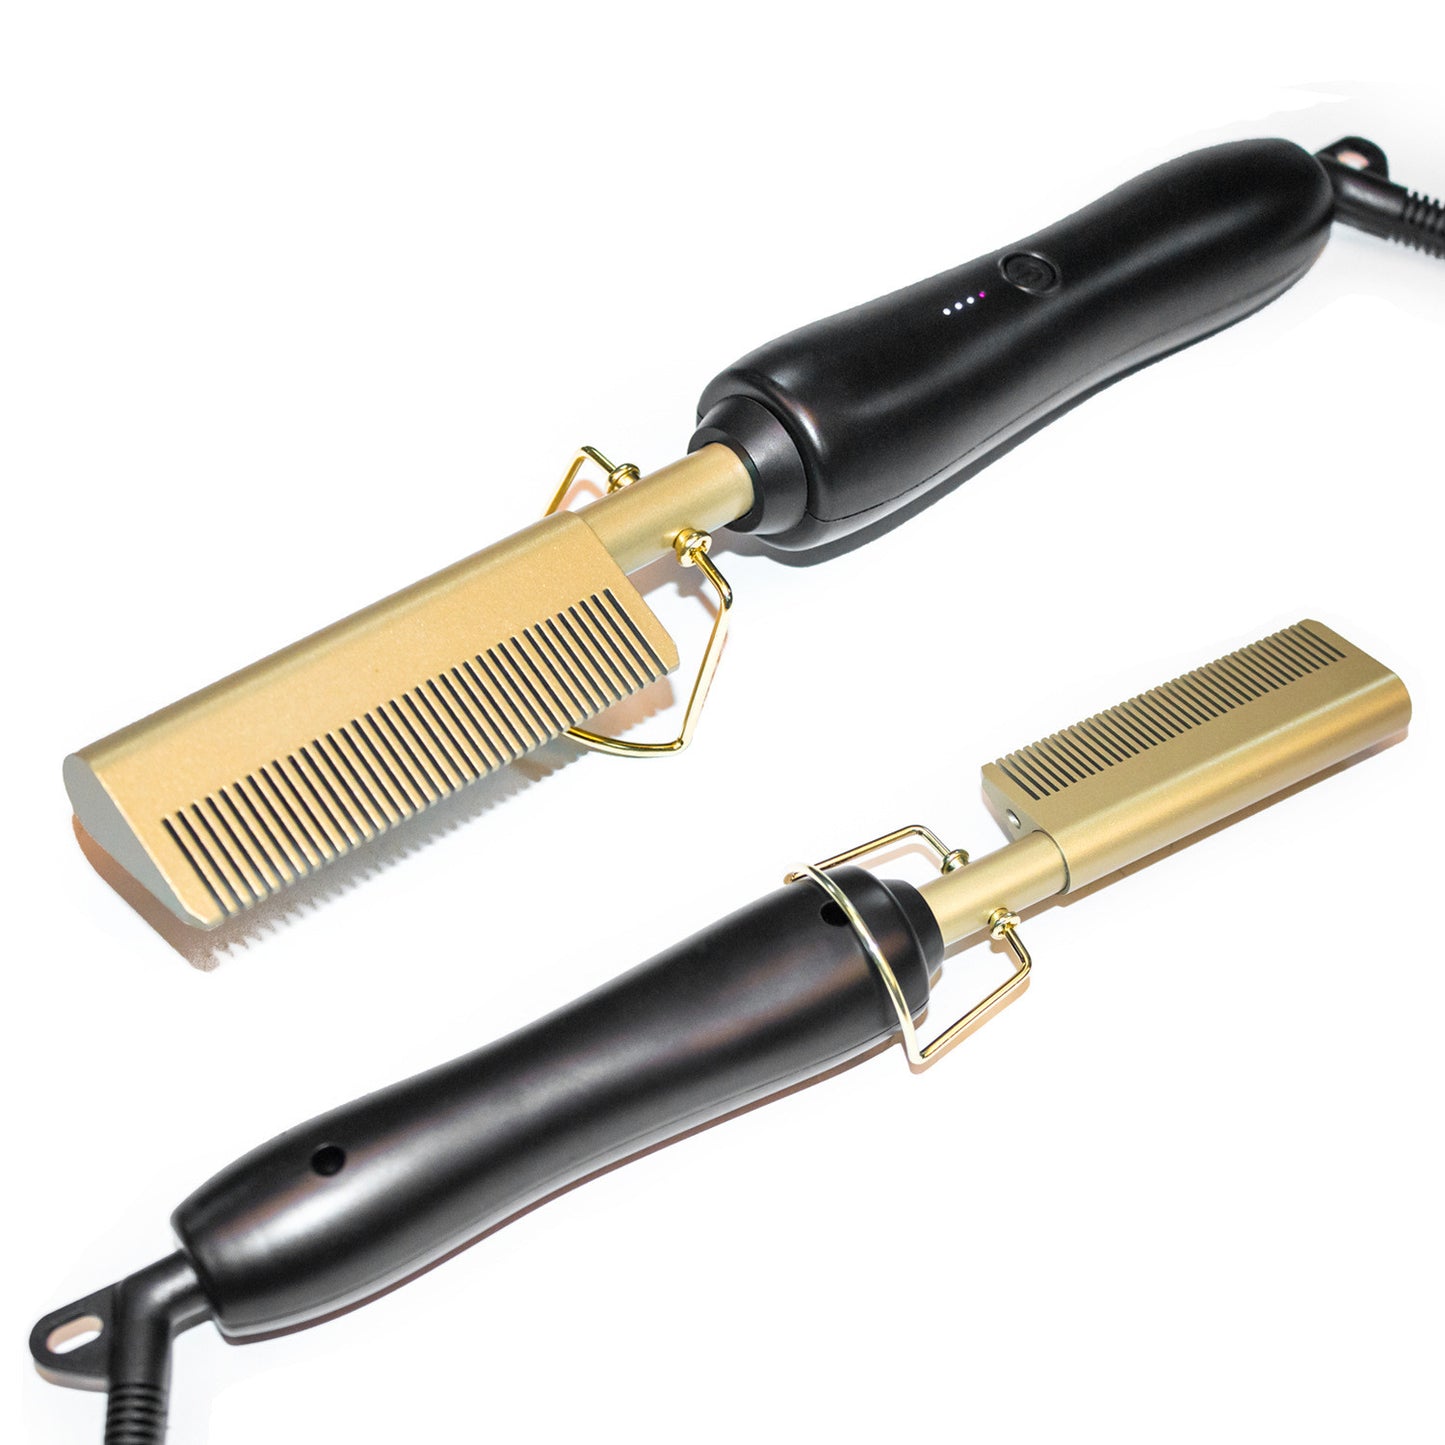 Copper comb wet and dry curling iron